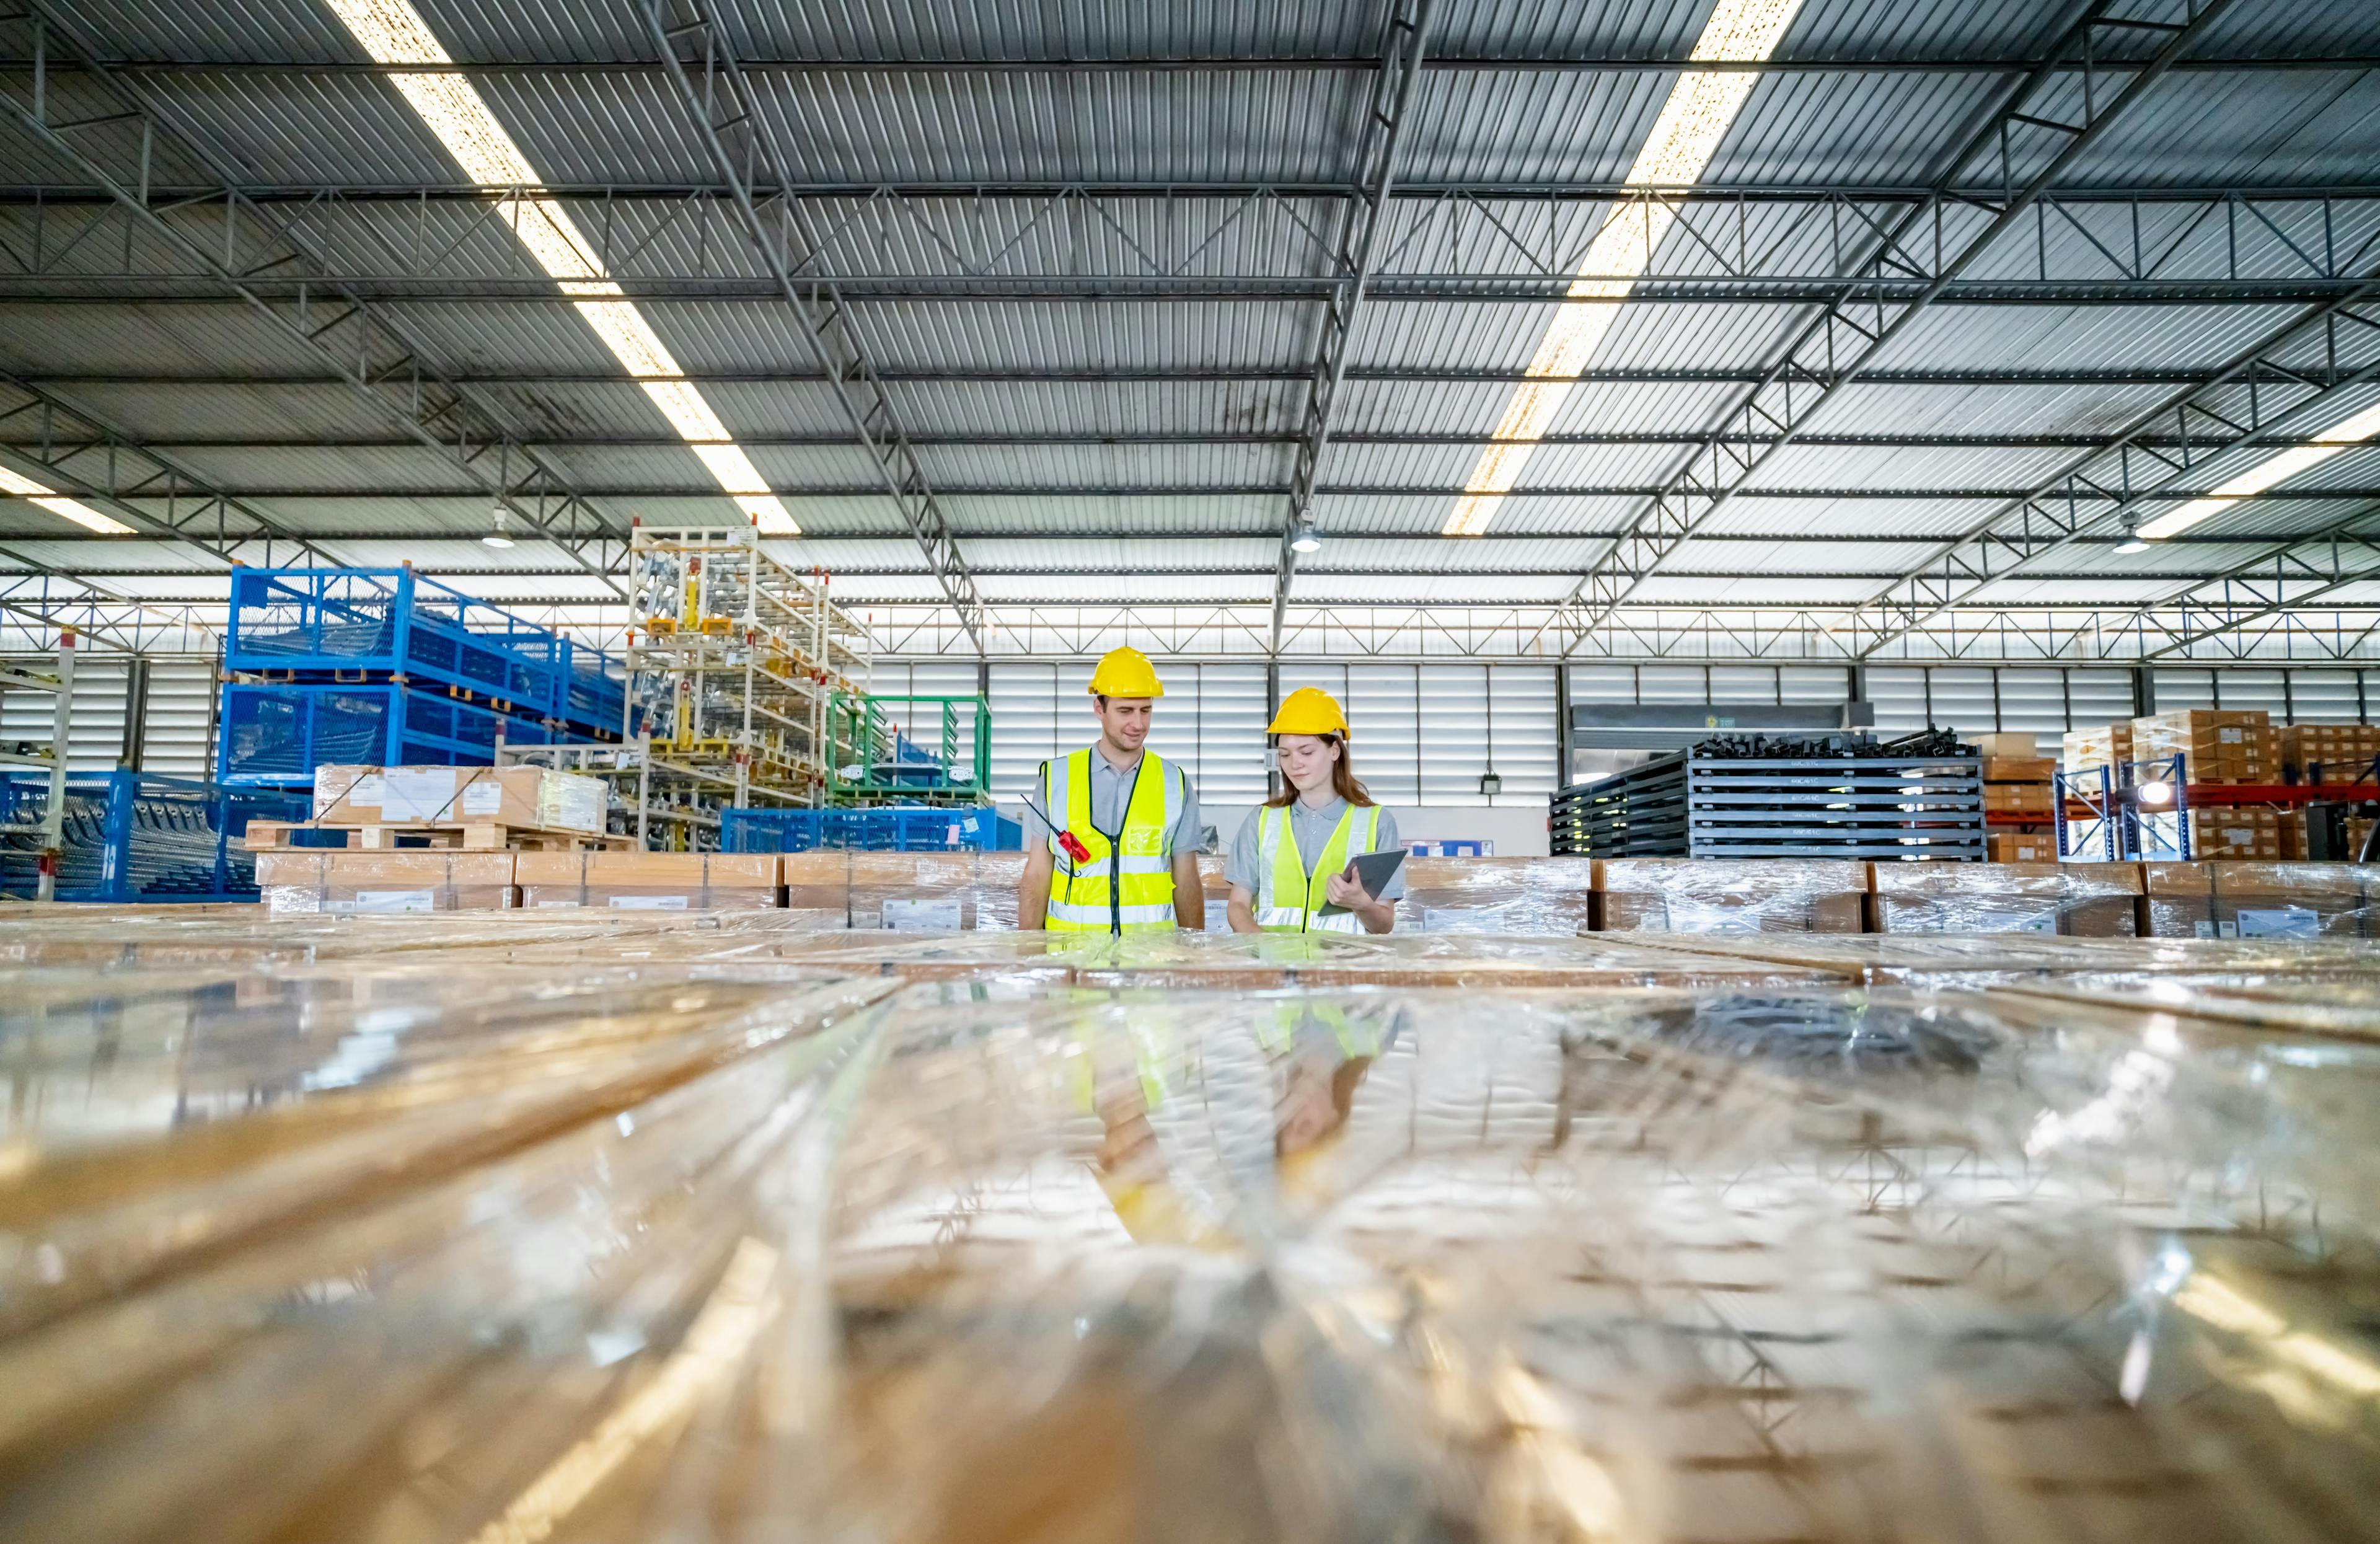 How to Invest in Industrial Warehousing